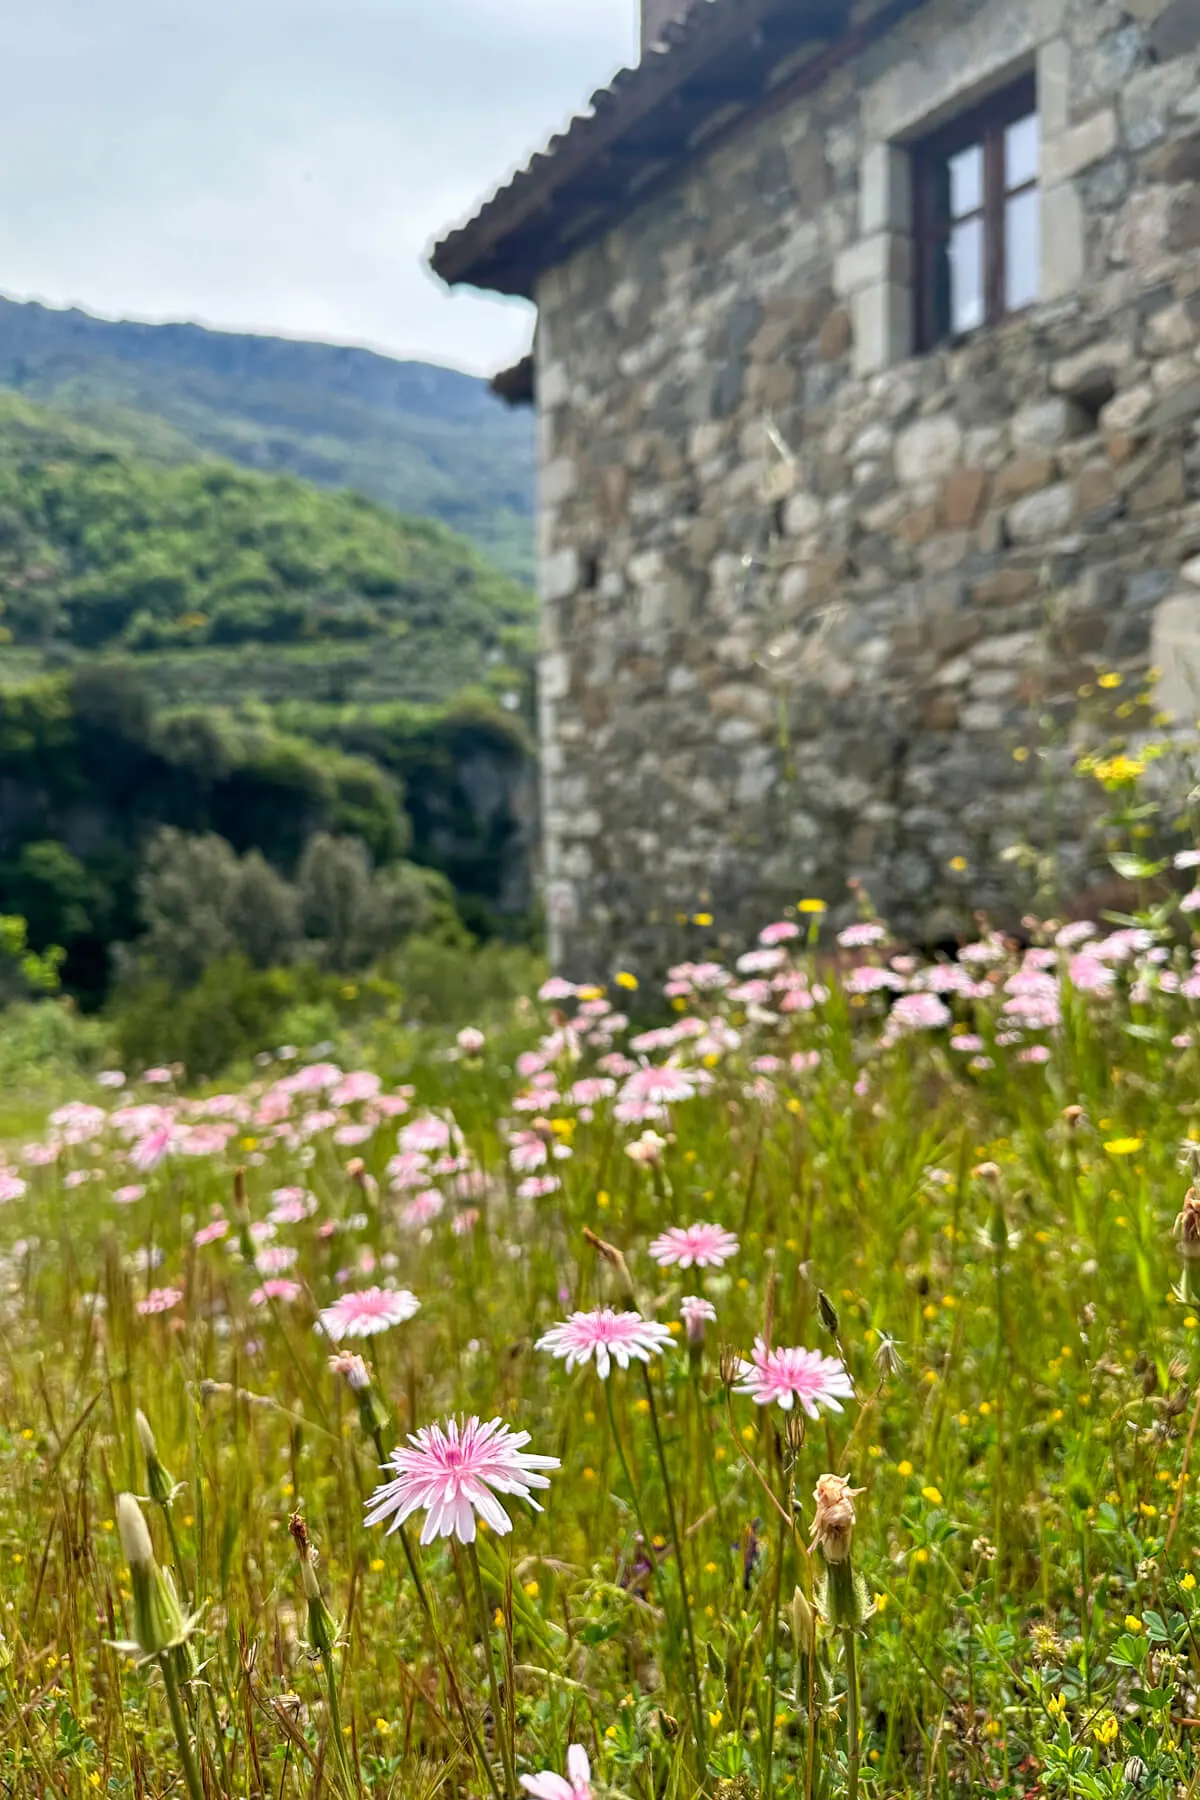 Pink wildflowers next to a stone building with hills in the background